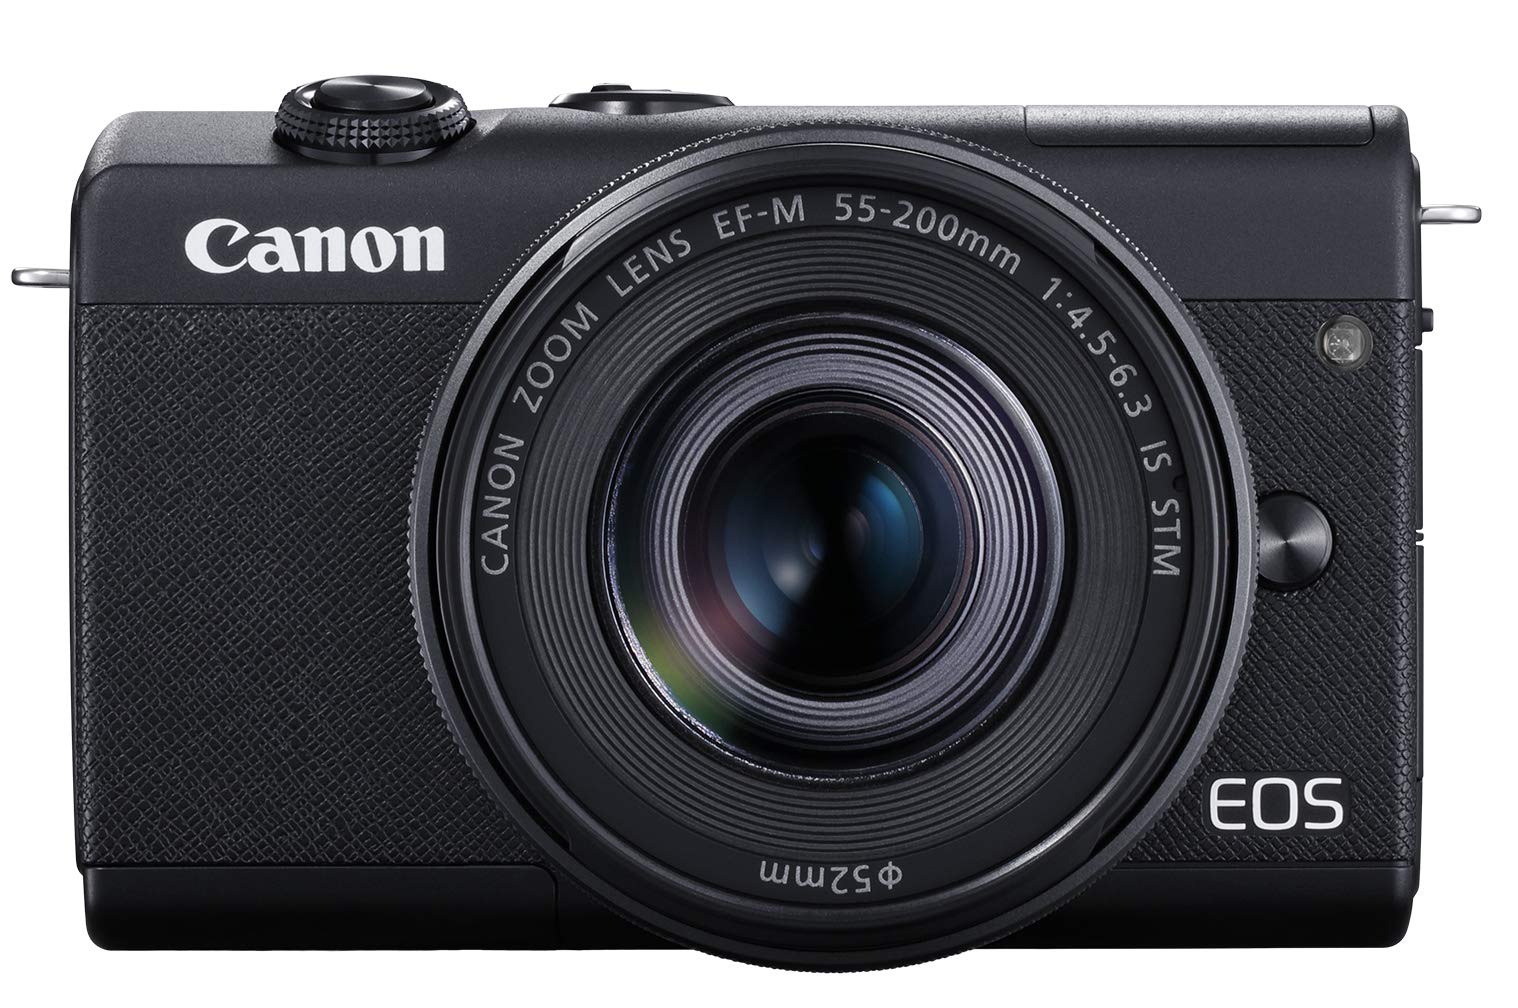 Canon EOS M200 Mirrorless Digital Compact Vlogging Camera with Vertical 4K Shooting, 3.0-inch Touch Panel LCD, Built-in Wi-Fi, and Bluetooth Technology